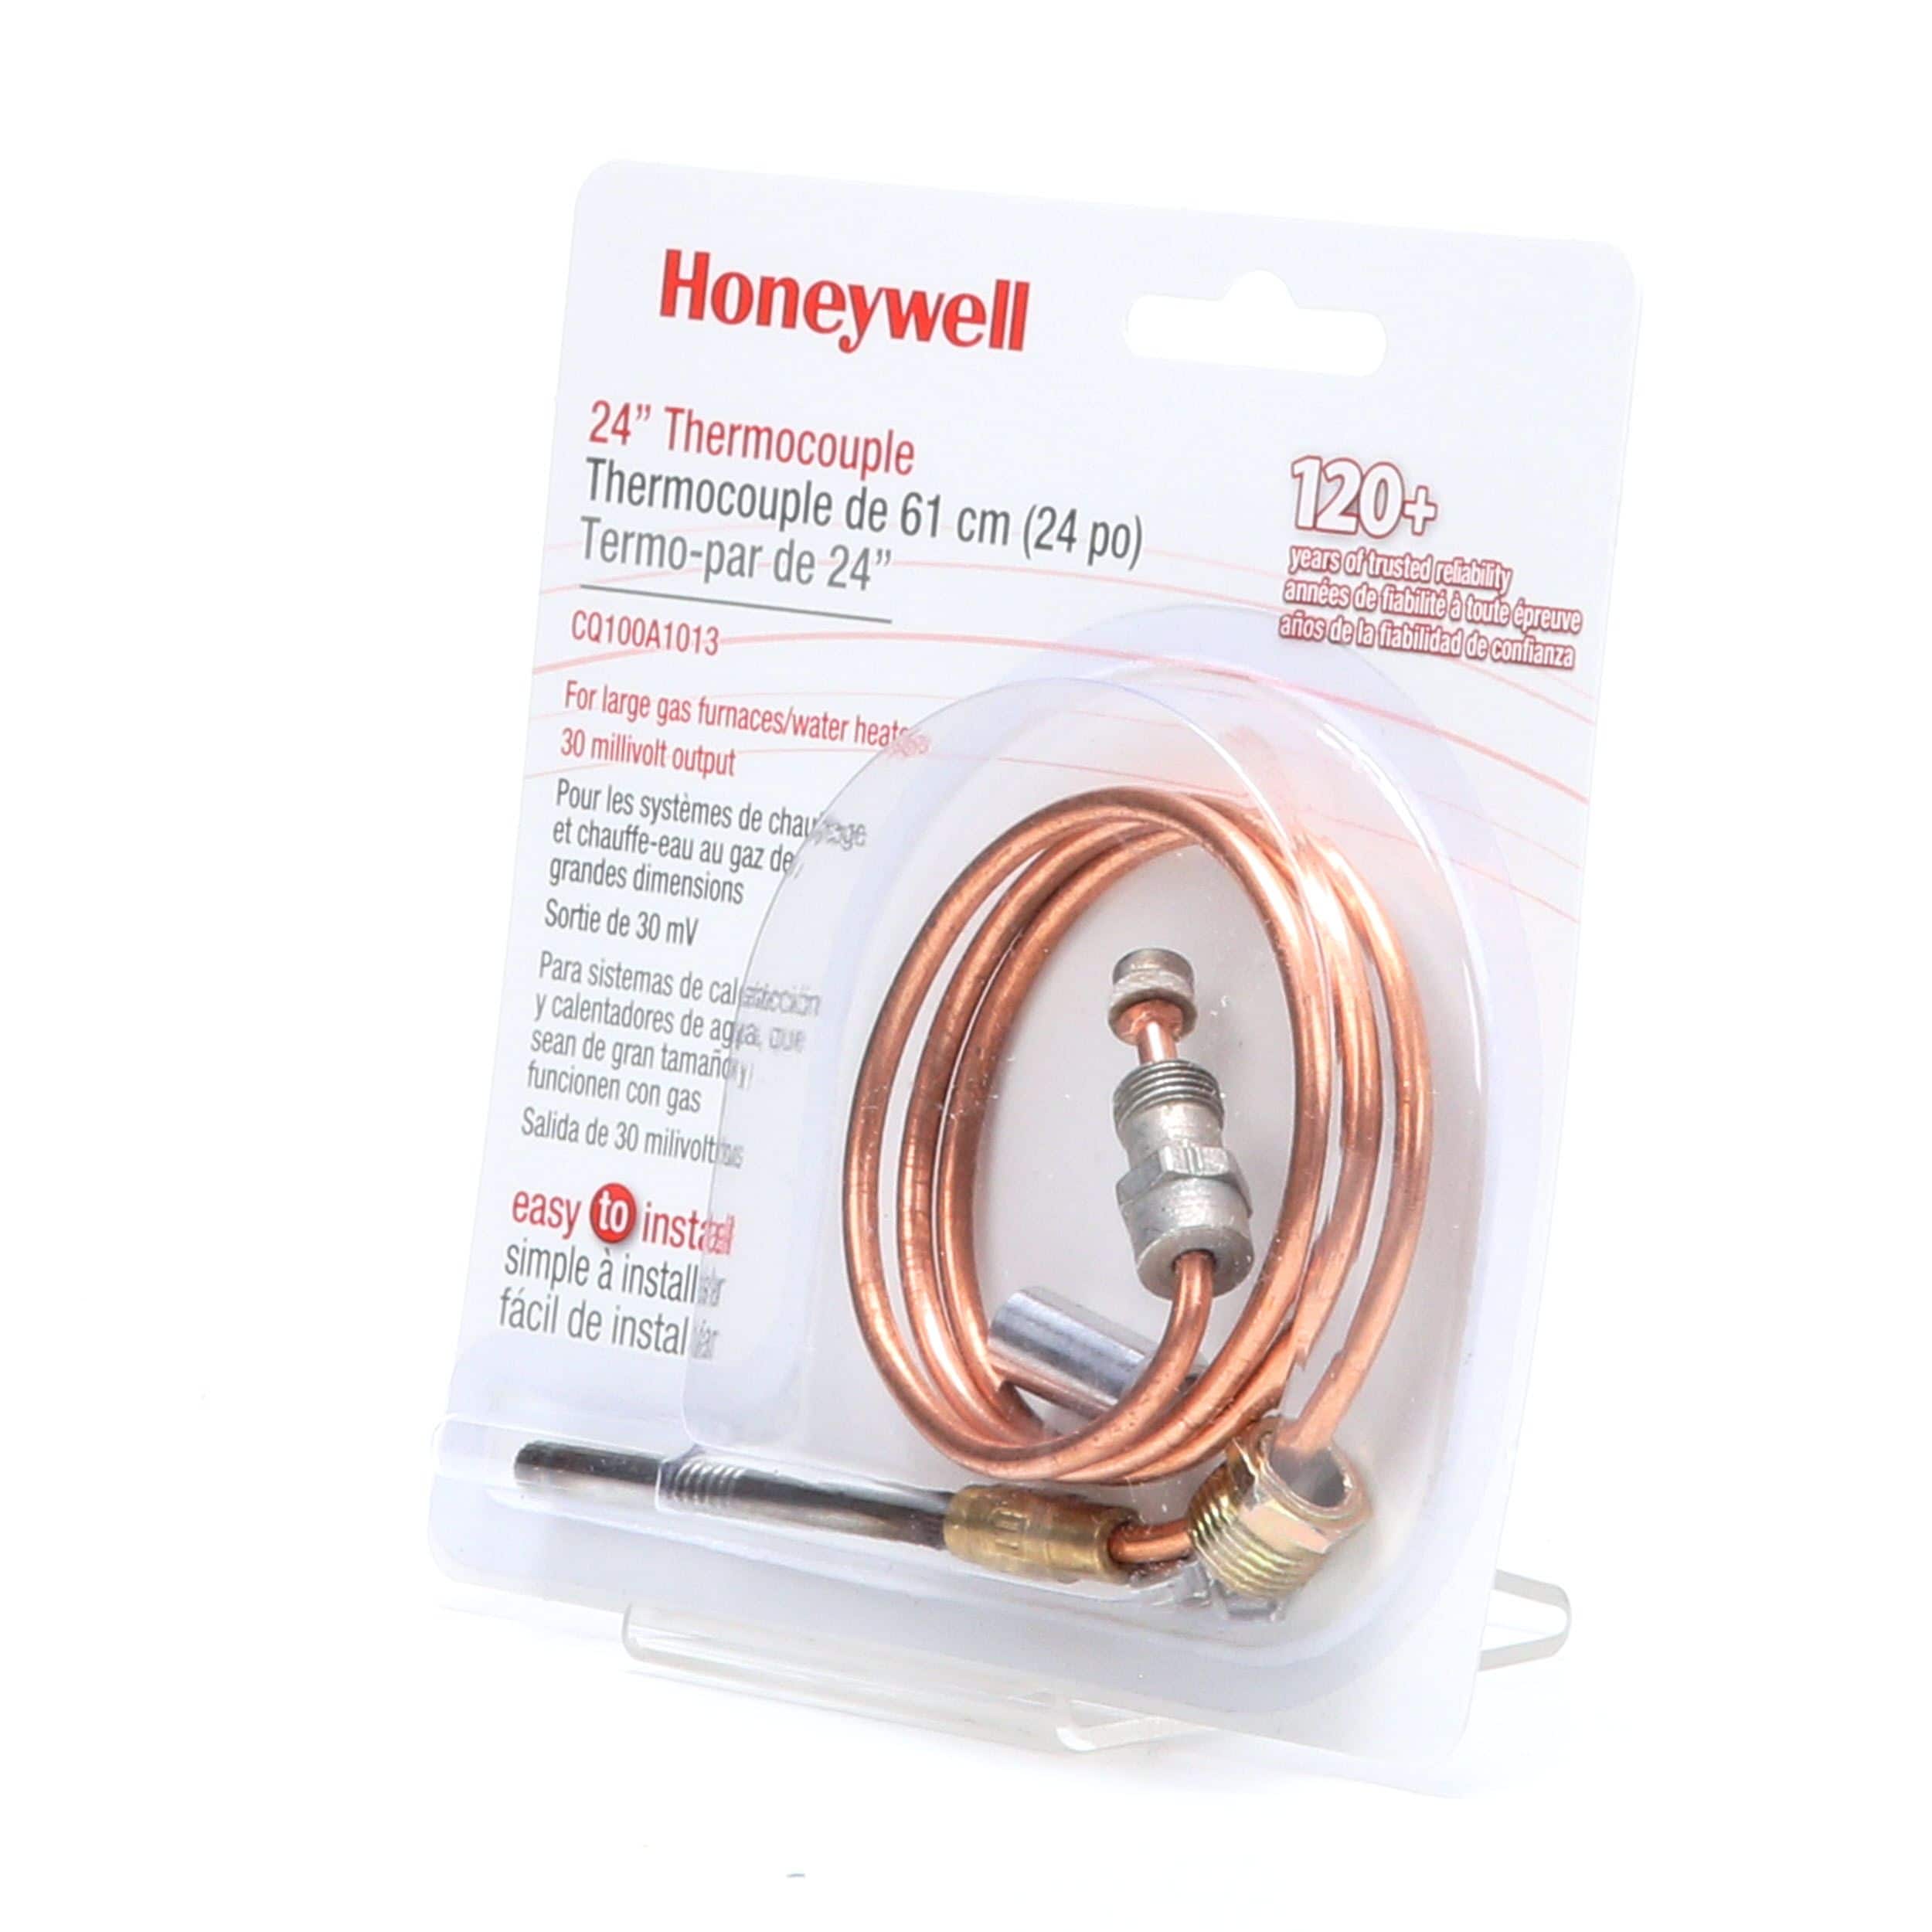 Honeywell remplacement Thermocouple 24" CQ100A1013/U 